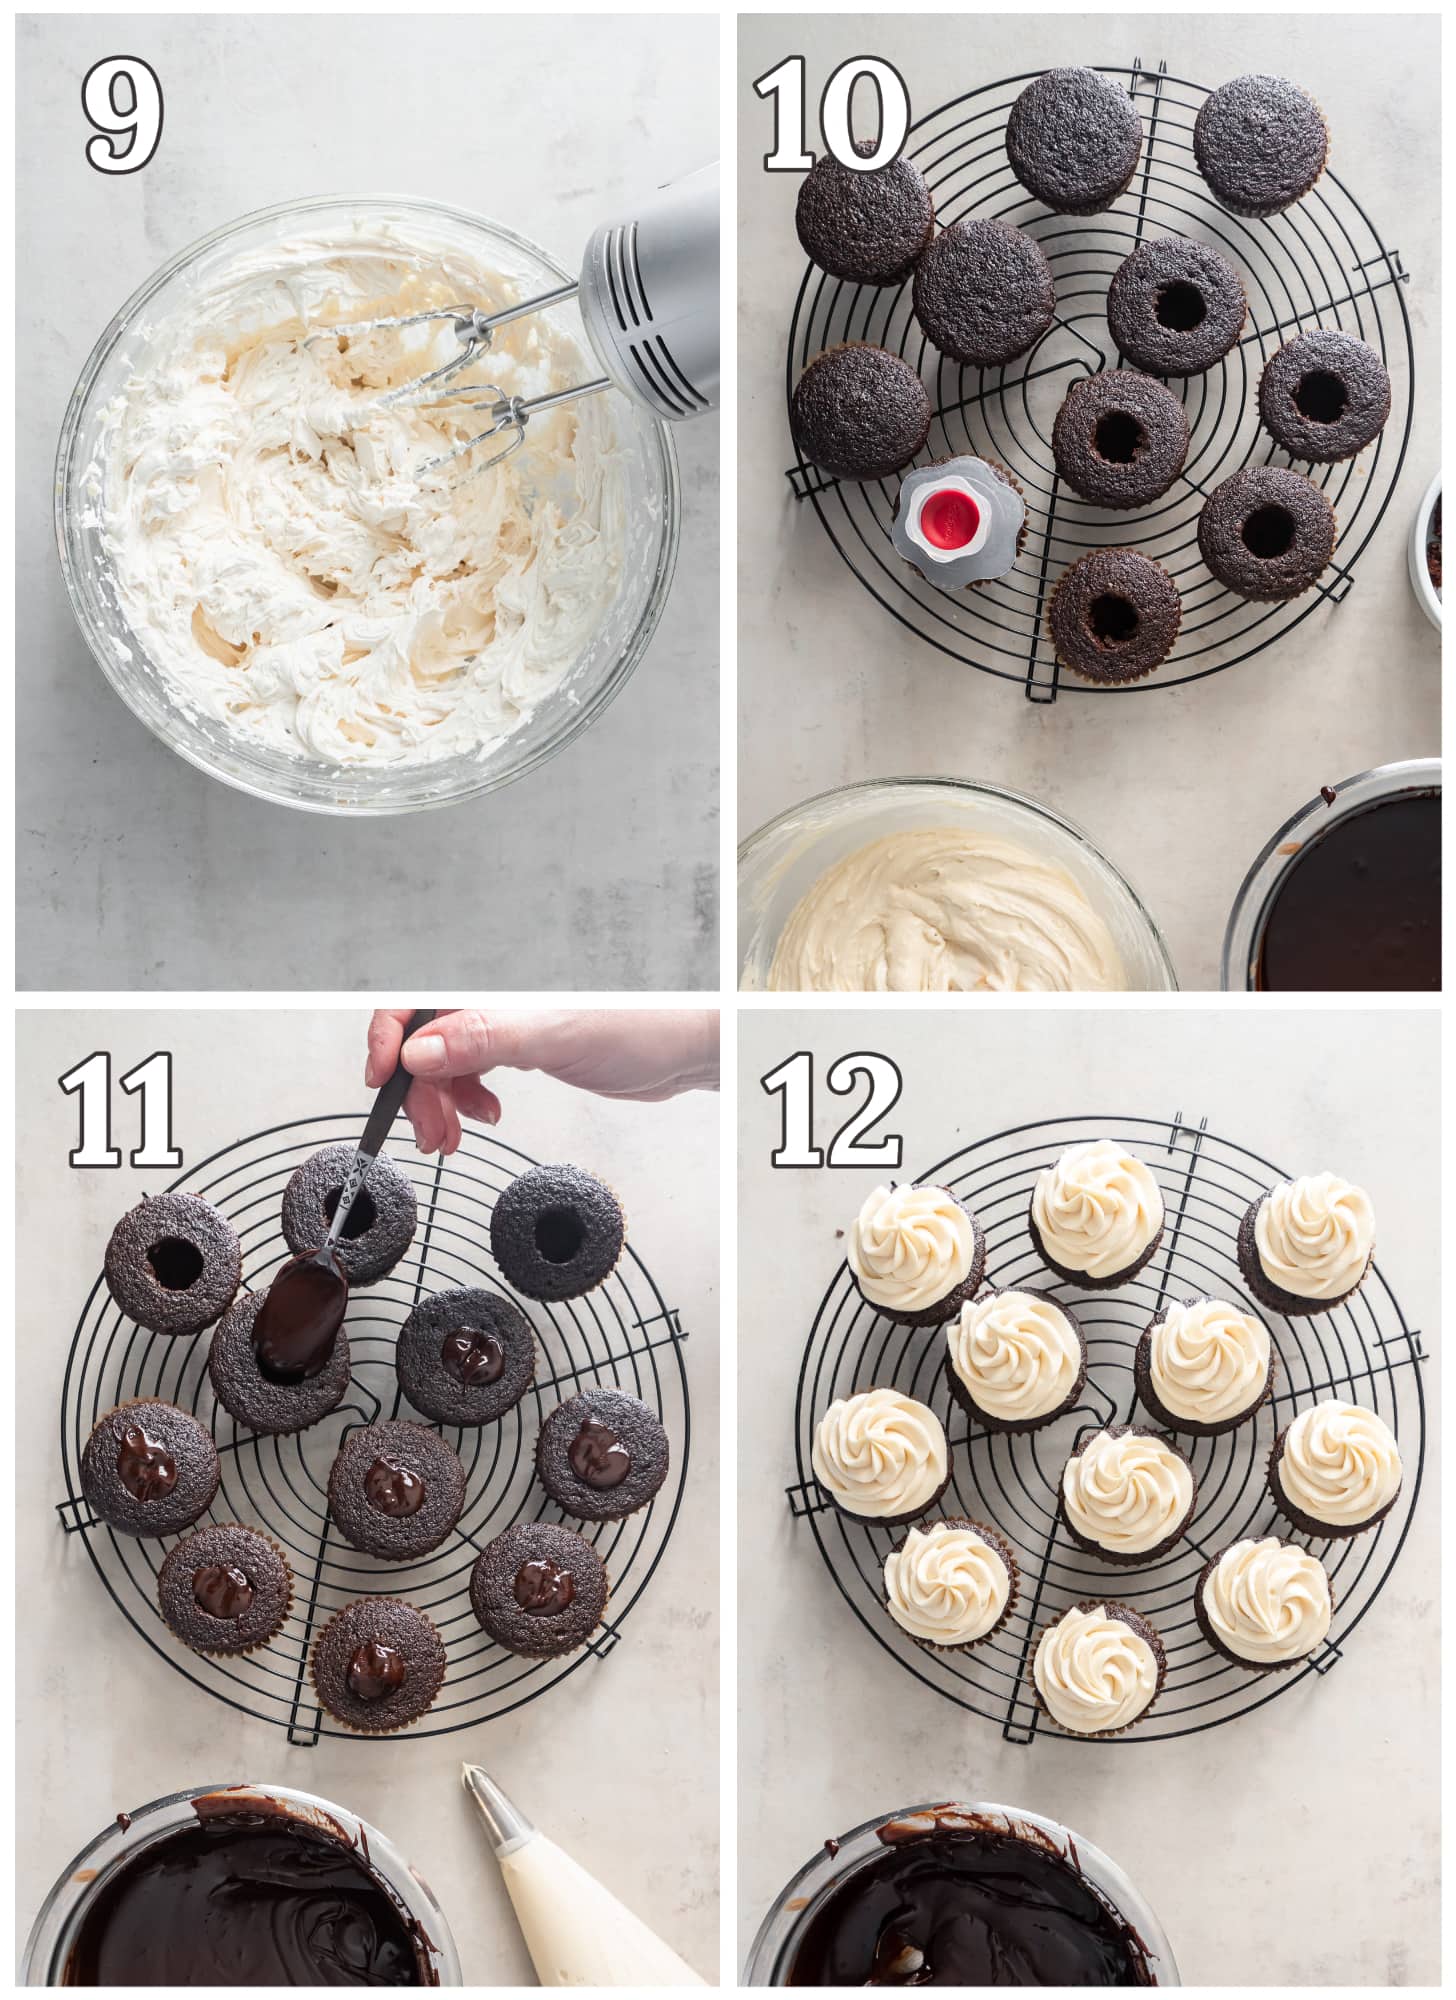 photo collage demonstrating how to make baileys frosting and assemble guinness cupcakes with whiskey ganache.